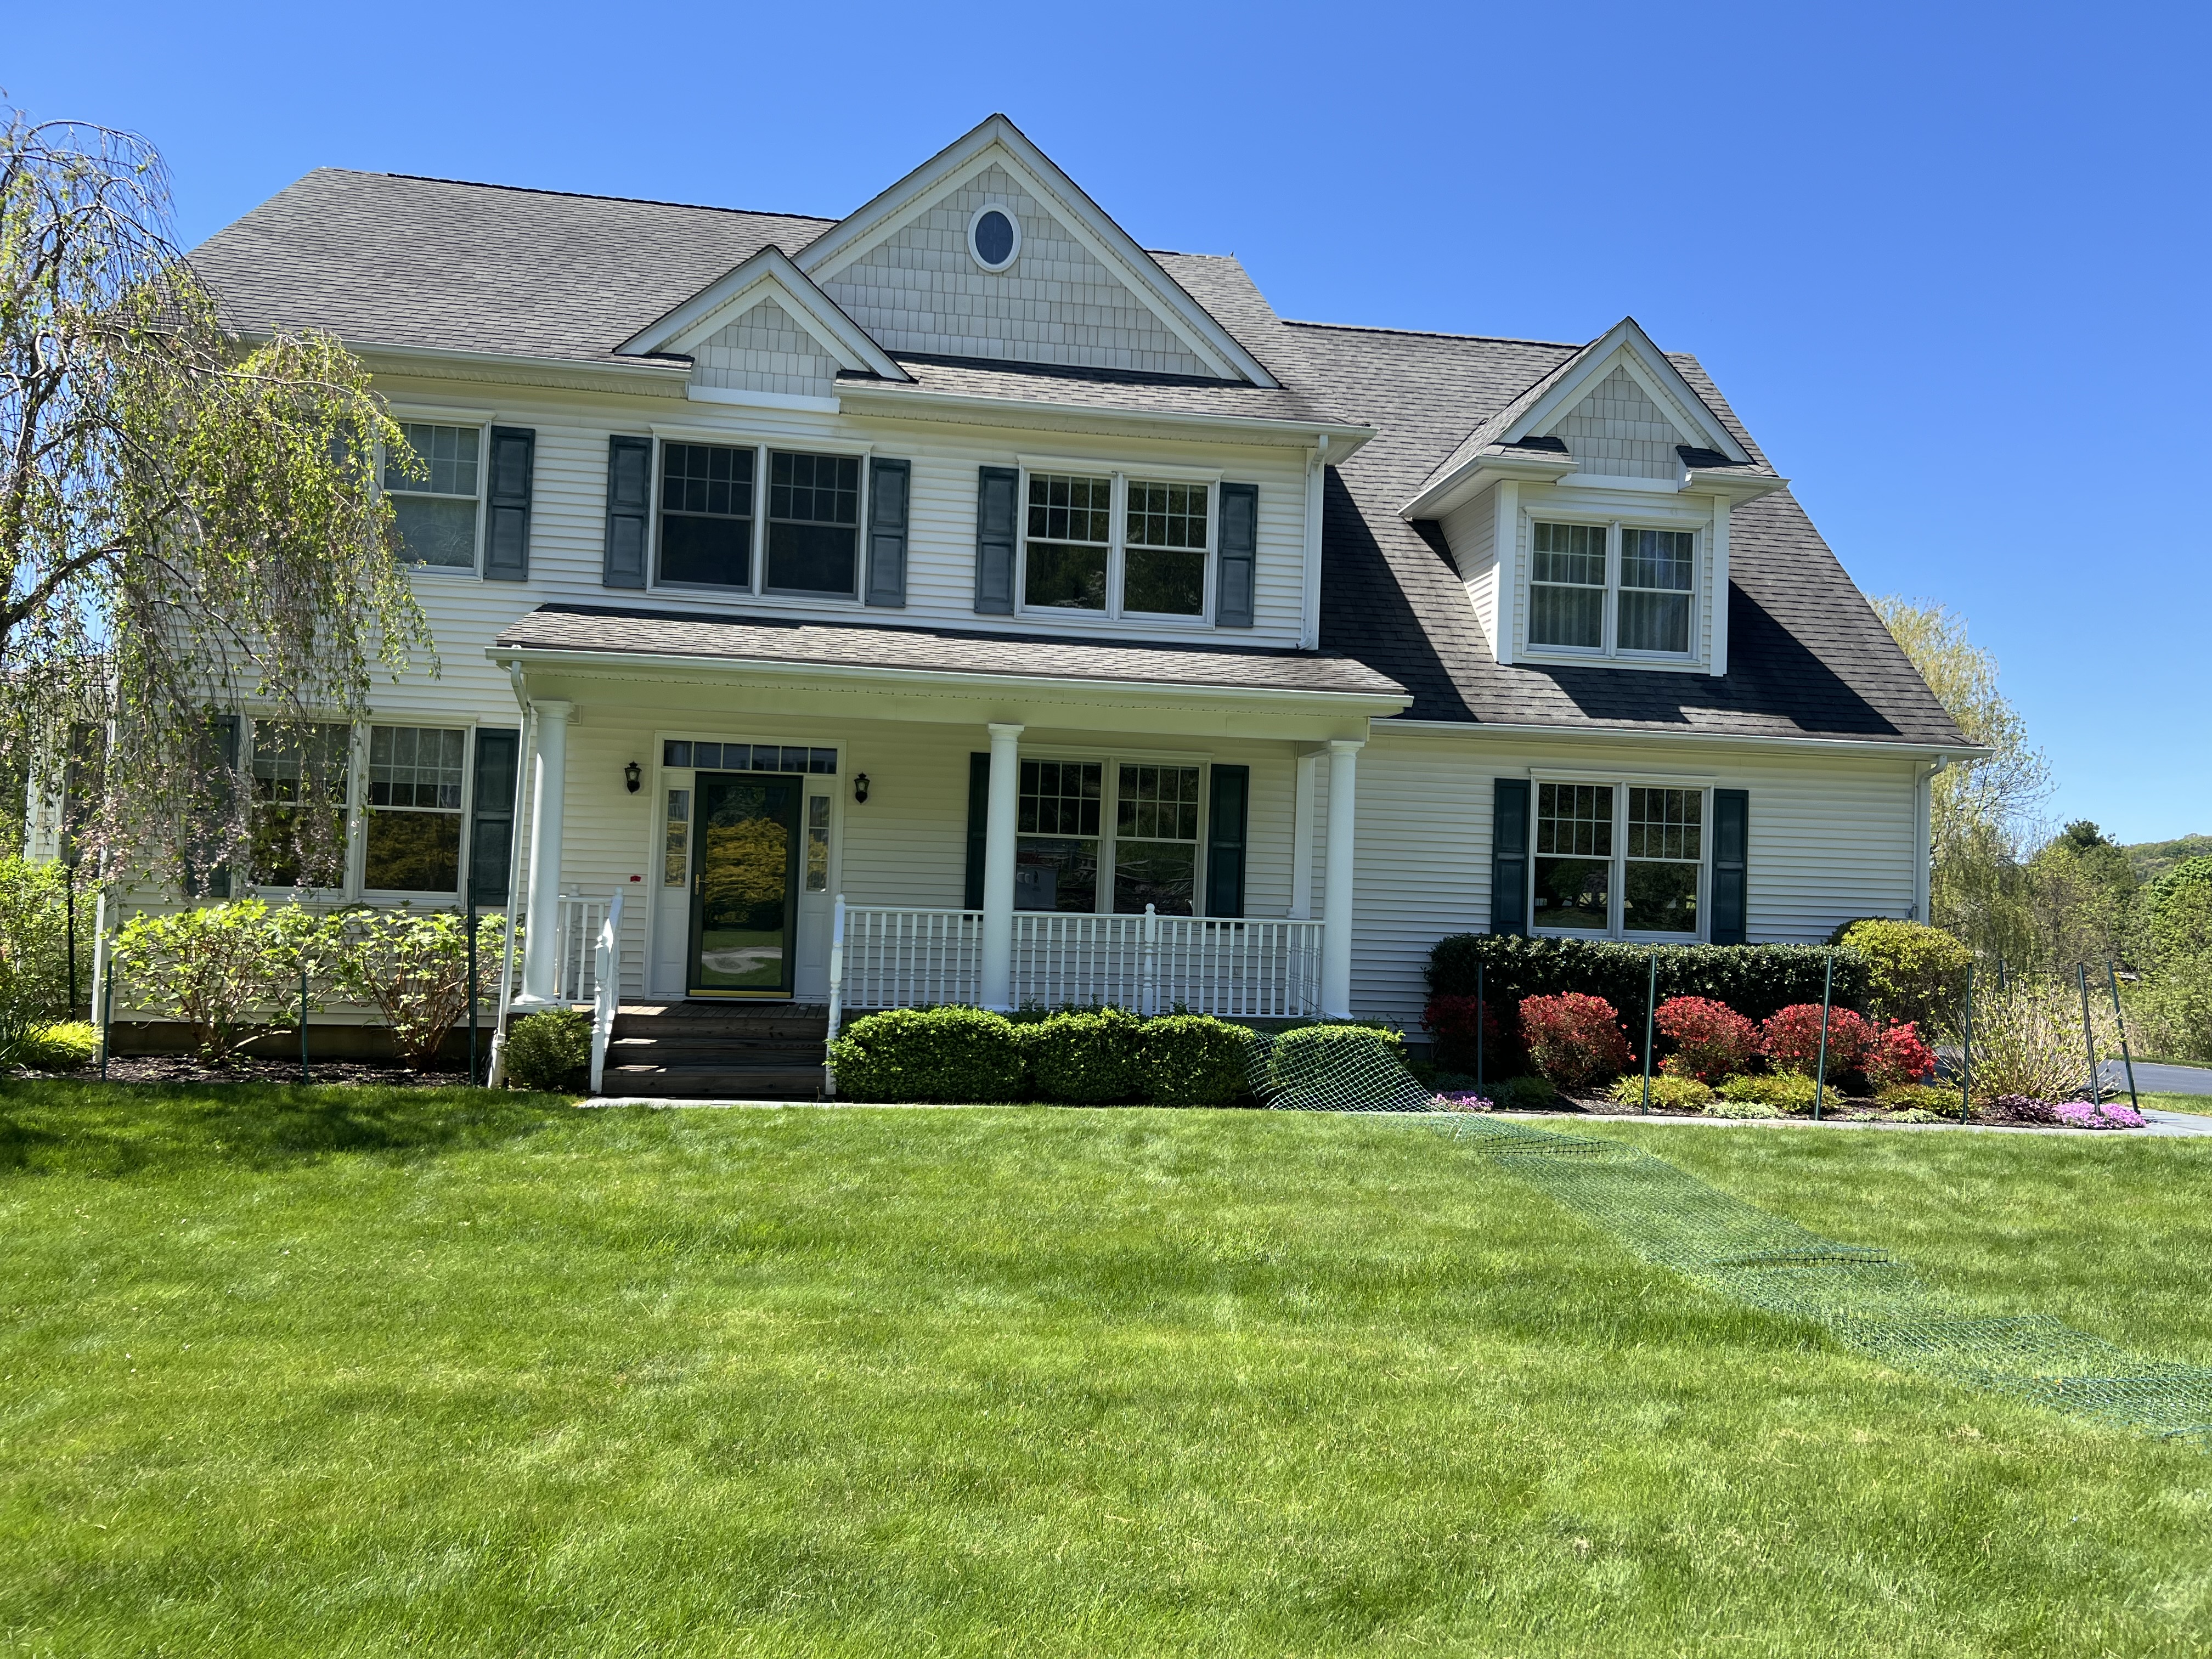 House wash & Window cleaning in Pouqhquag, NY 